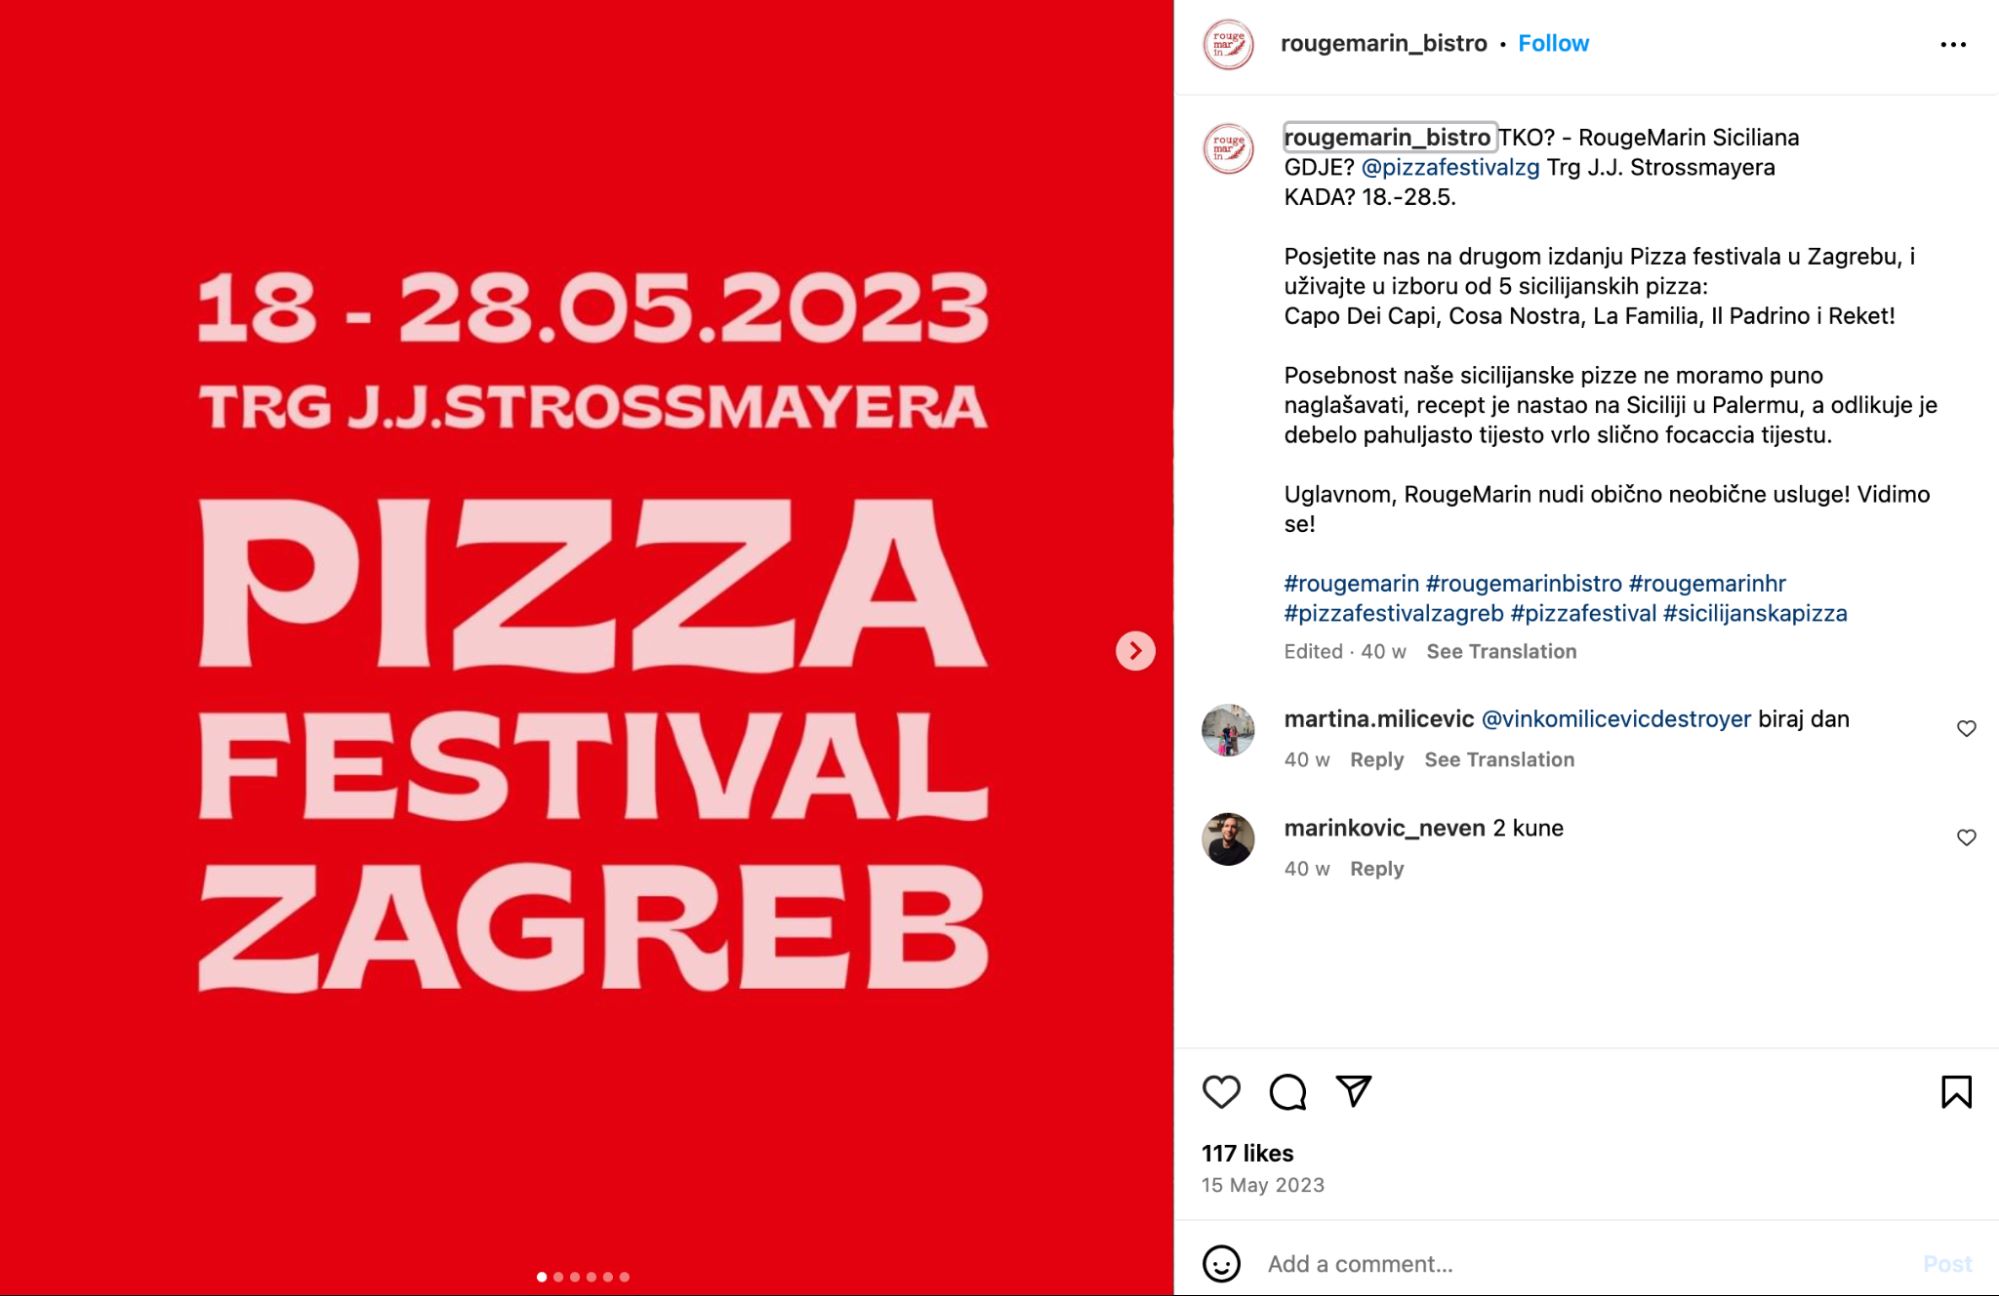 rougemarin bistro instagram post screenshot about a pizza festival in zagreb